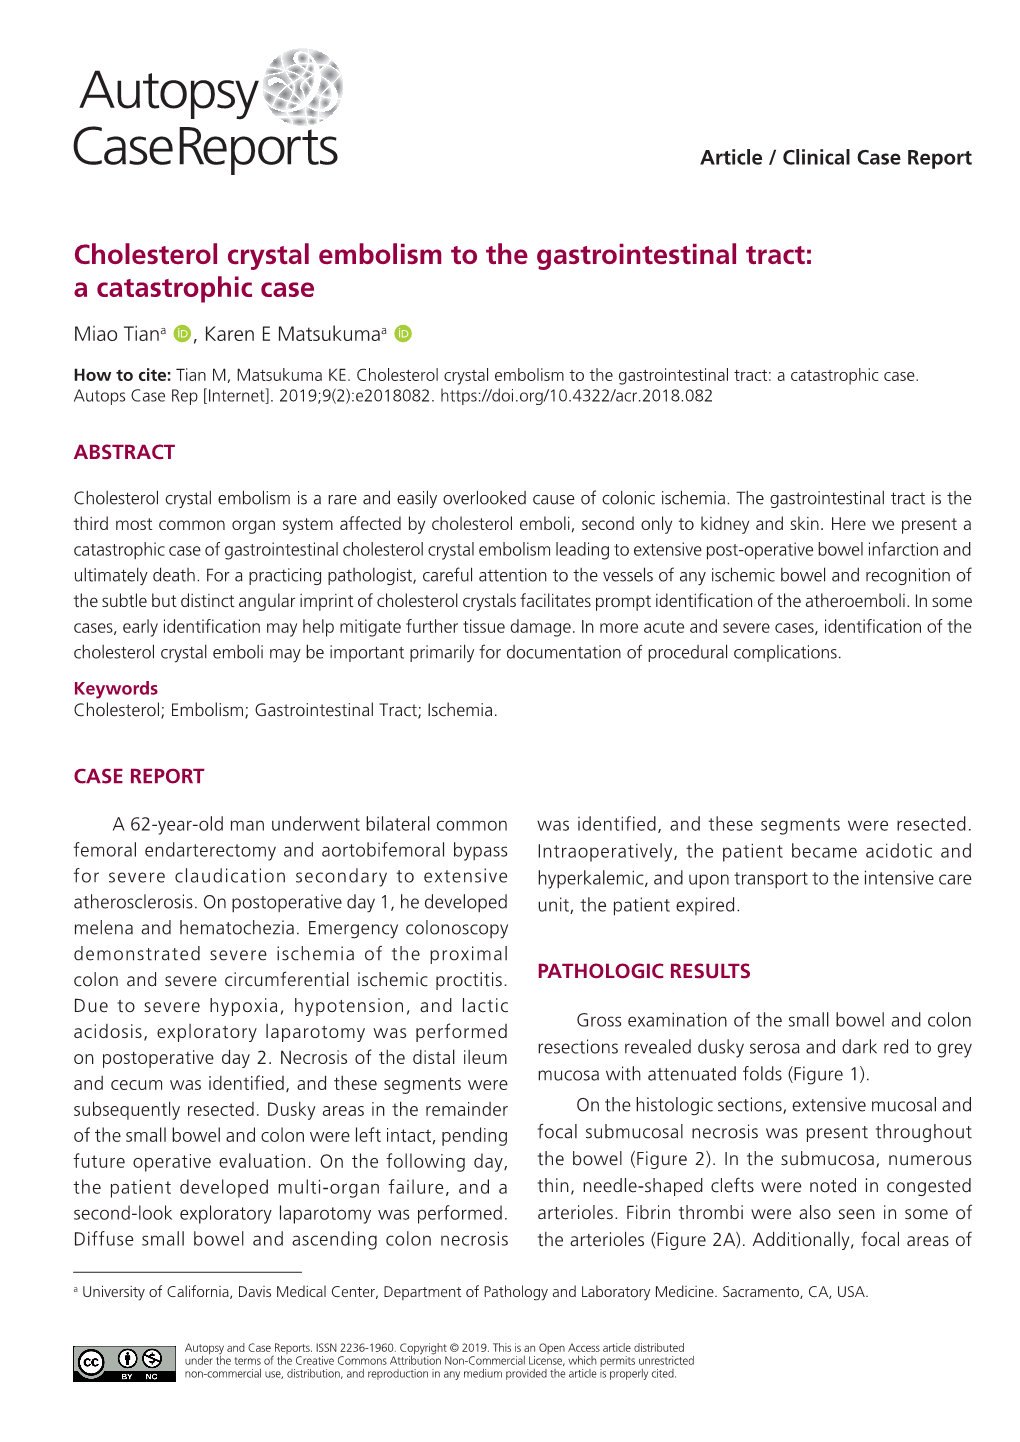 Cholesterol Crystal Embolism to the Gastrointestinal Tract: a Catastrophic Case